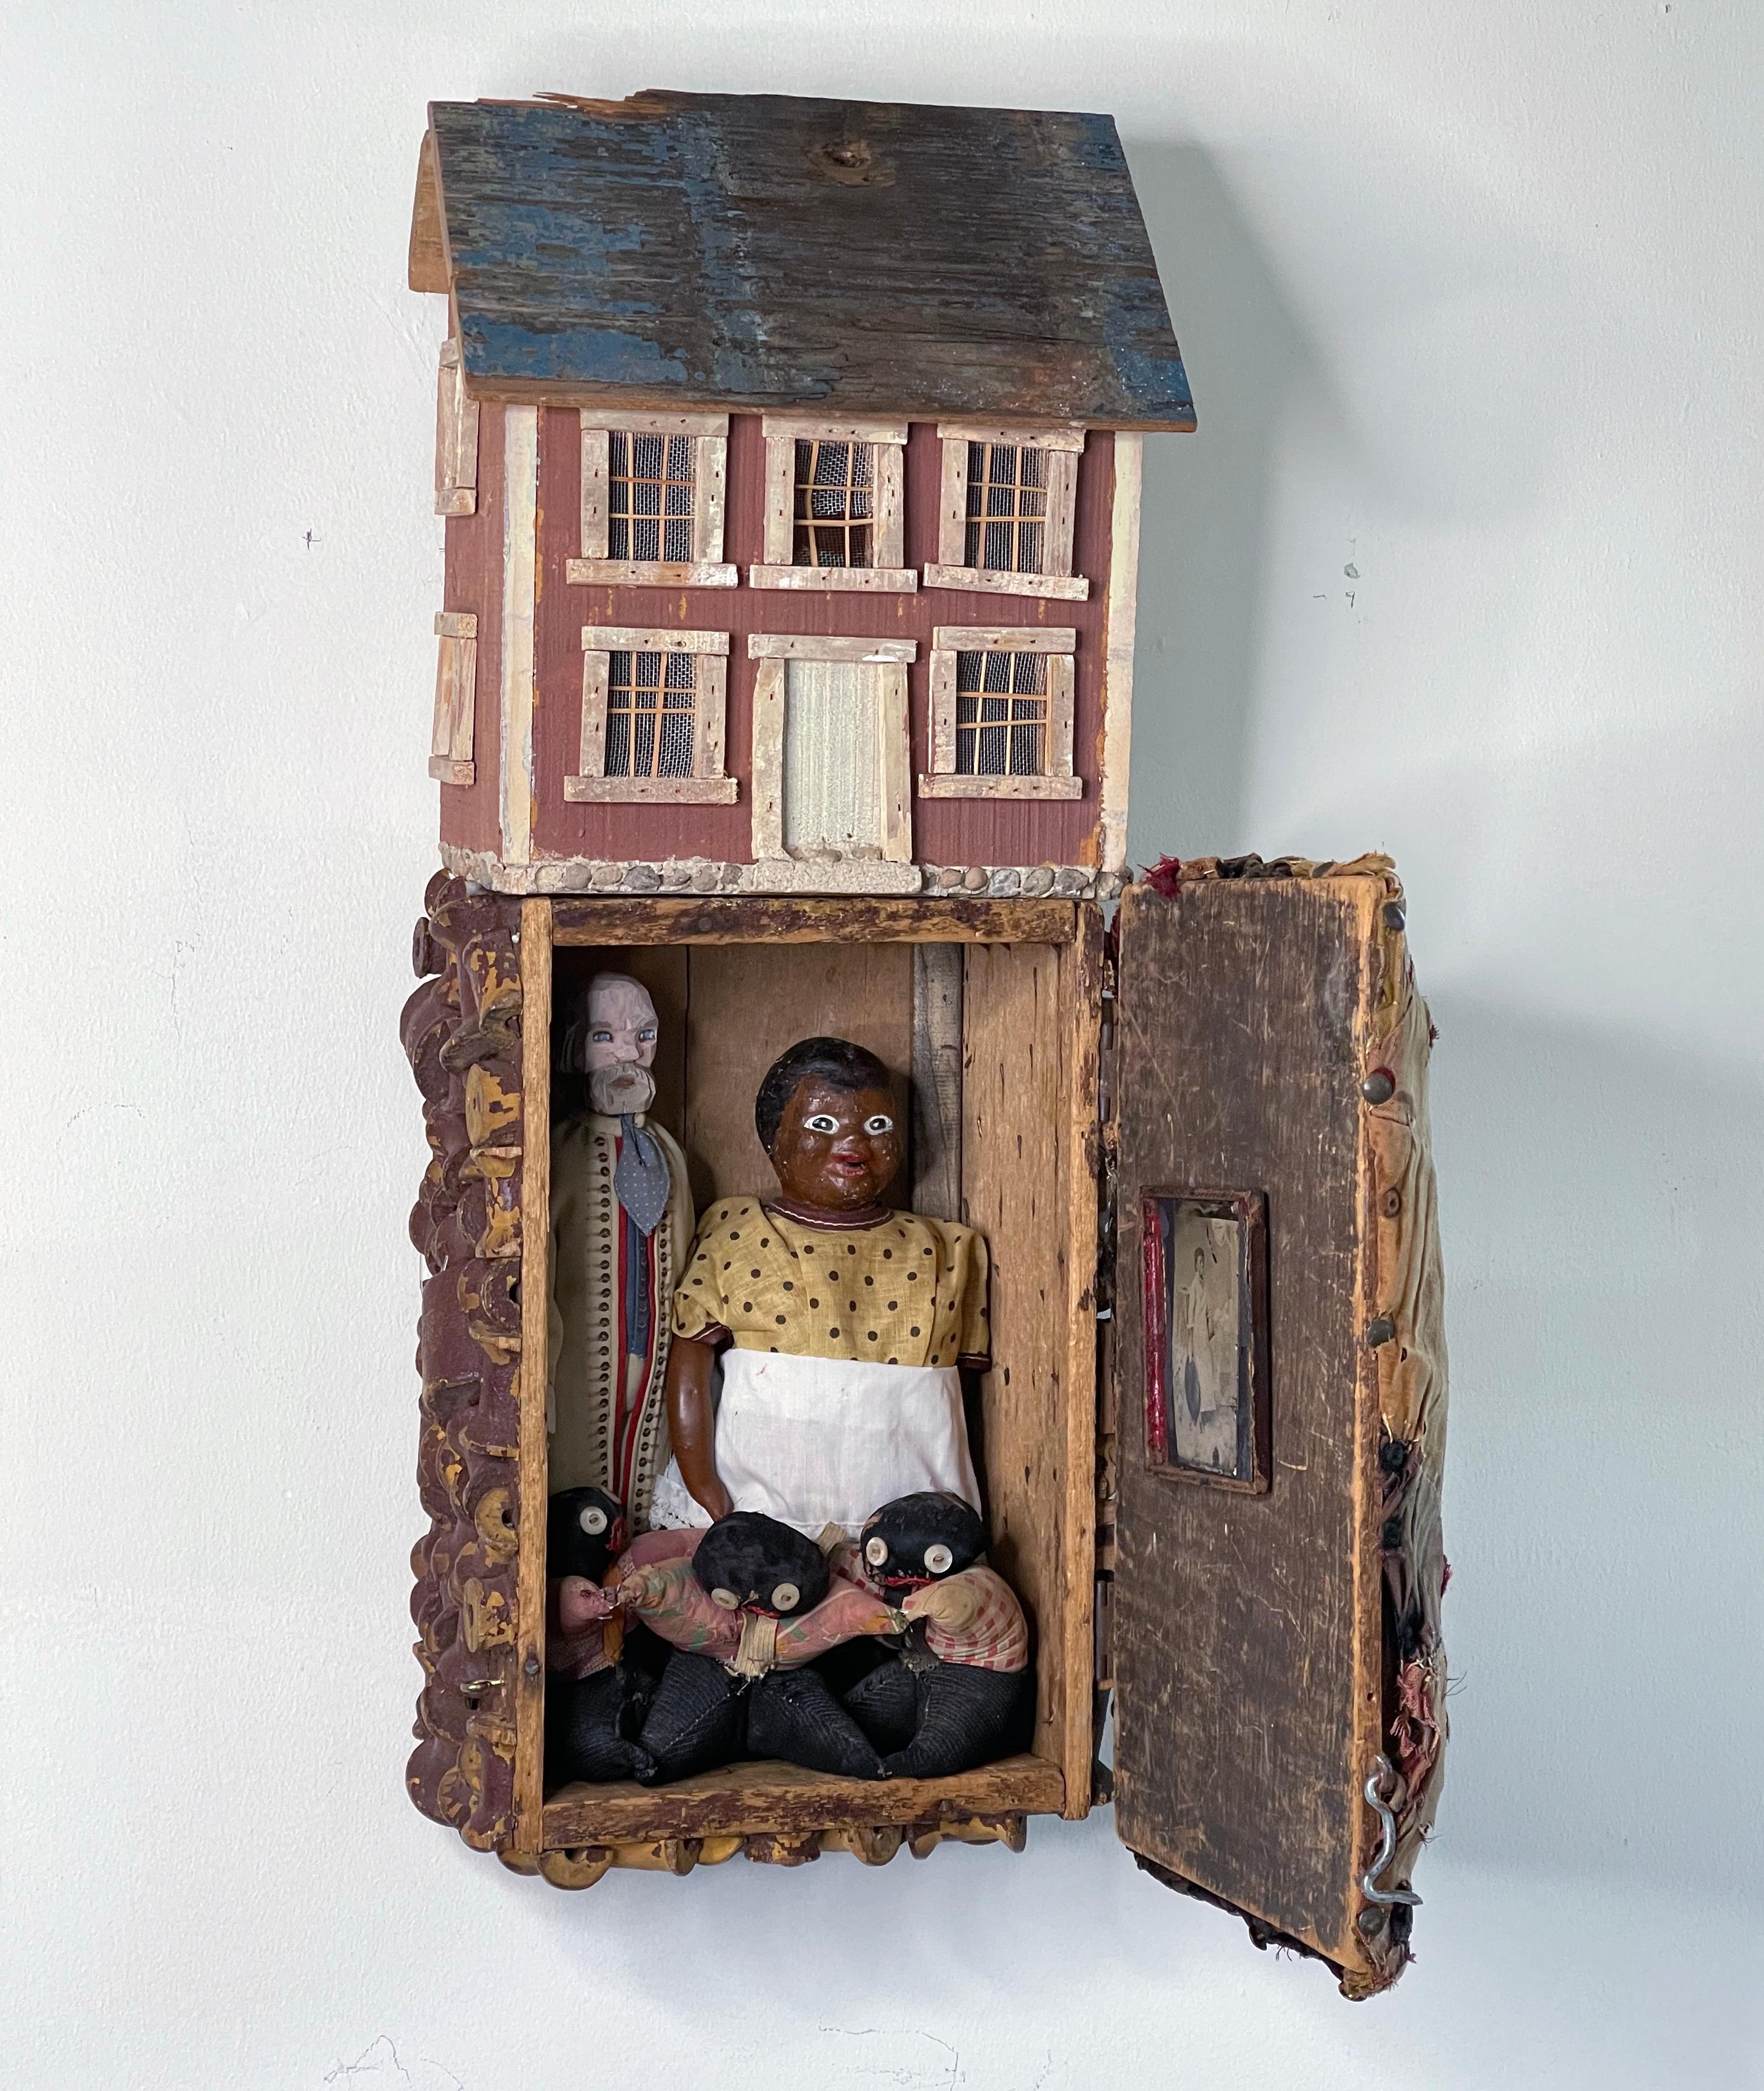 American Story No.1776 - Sculpture by Kat Flyn